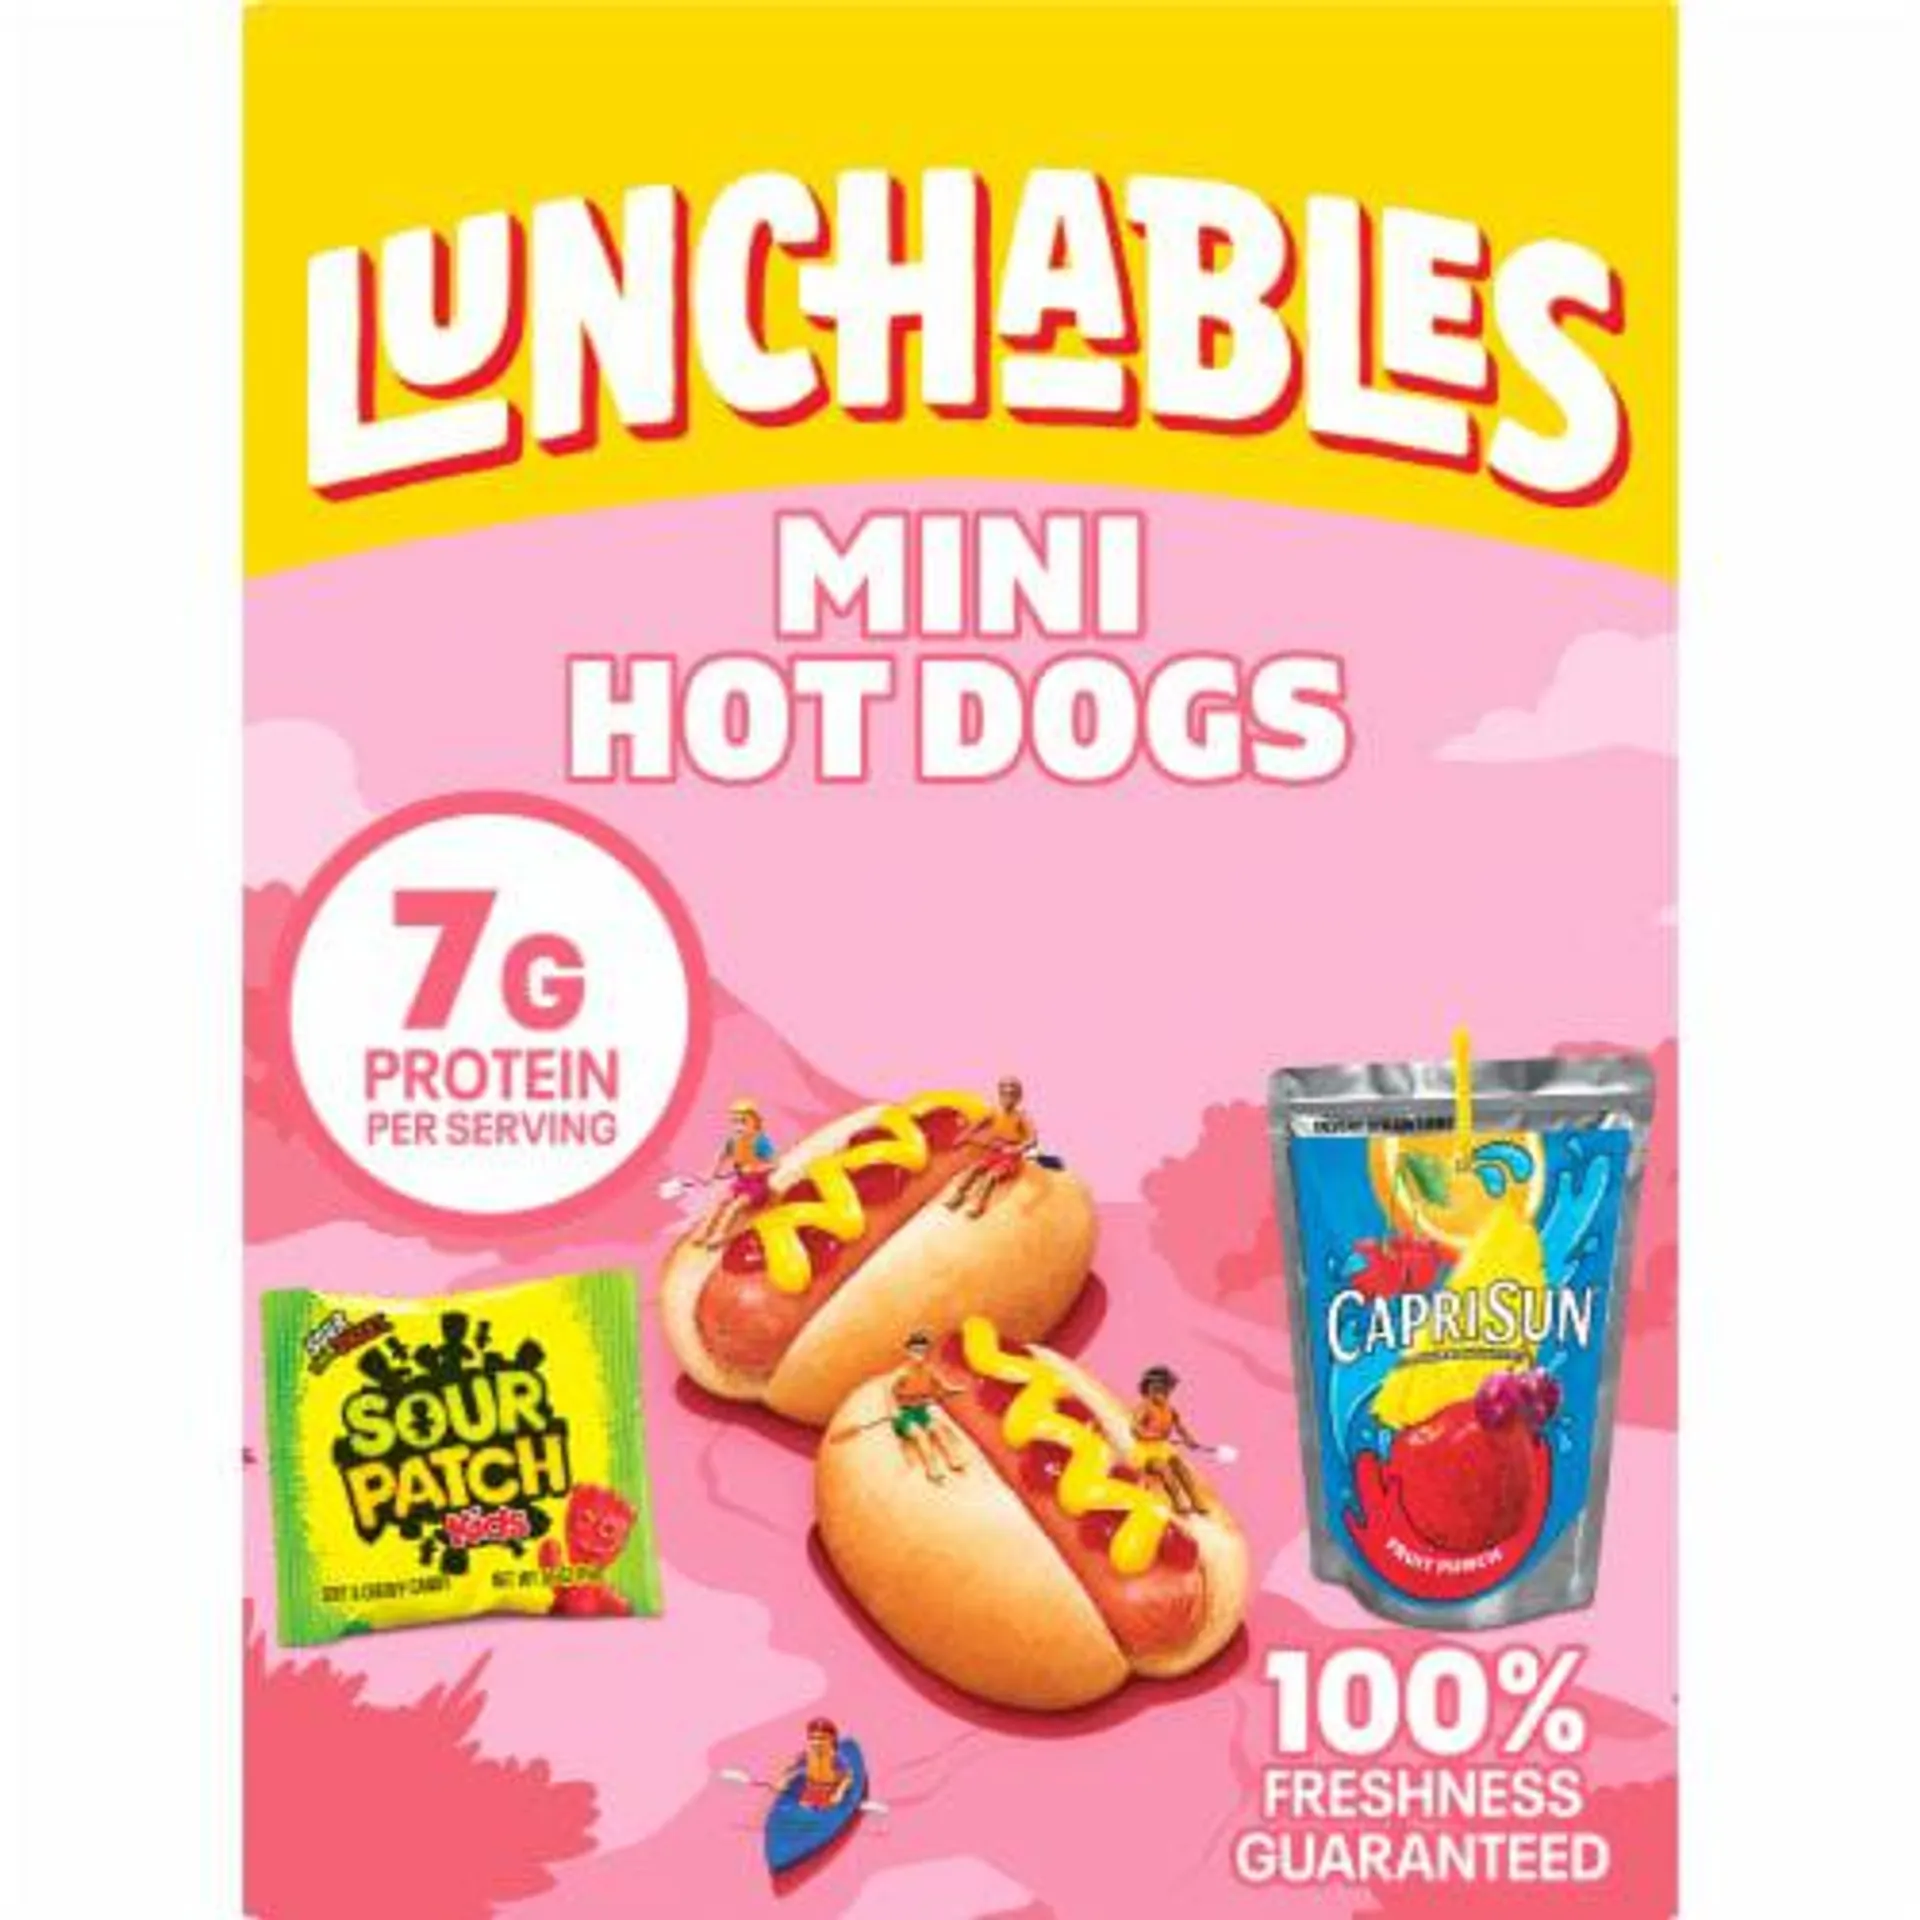 Lunchables Mini Hot Dogs with Capri Sun Drink & Sour Patch Kids Candy Kids Lunch Meal Kit